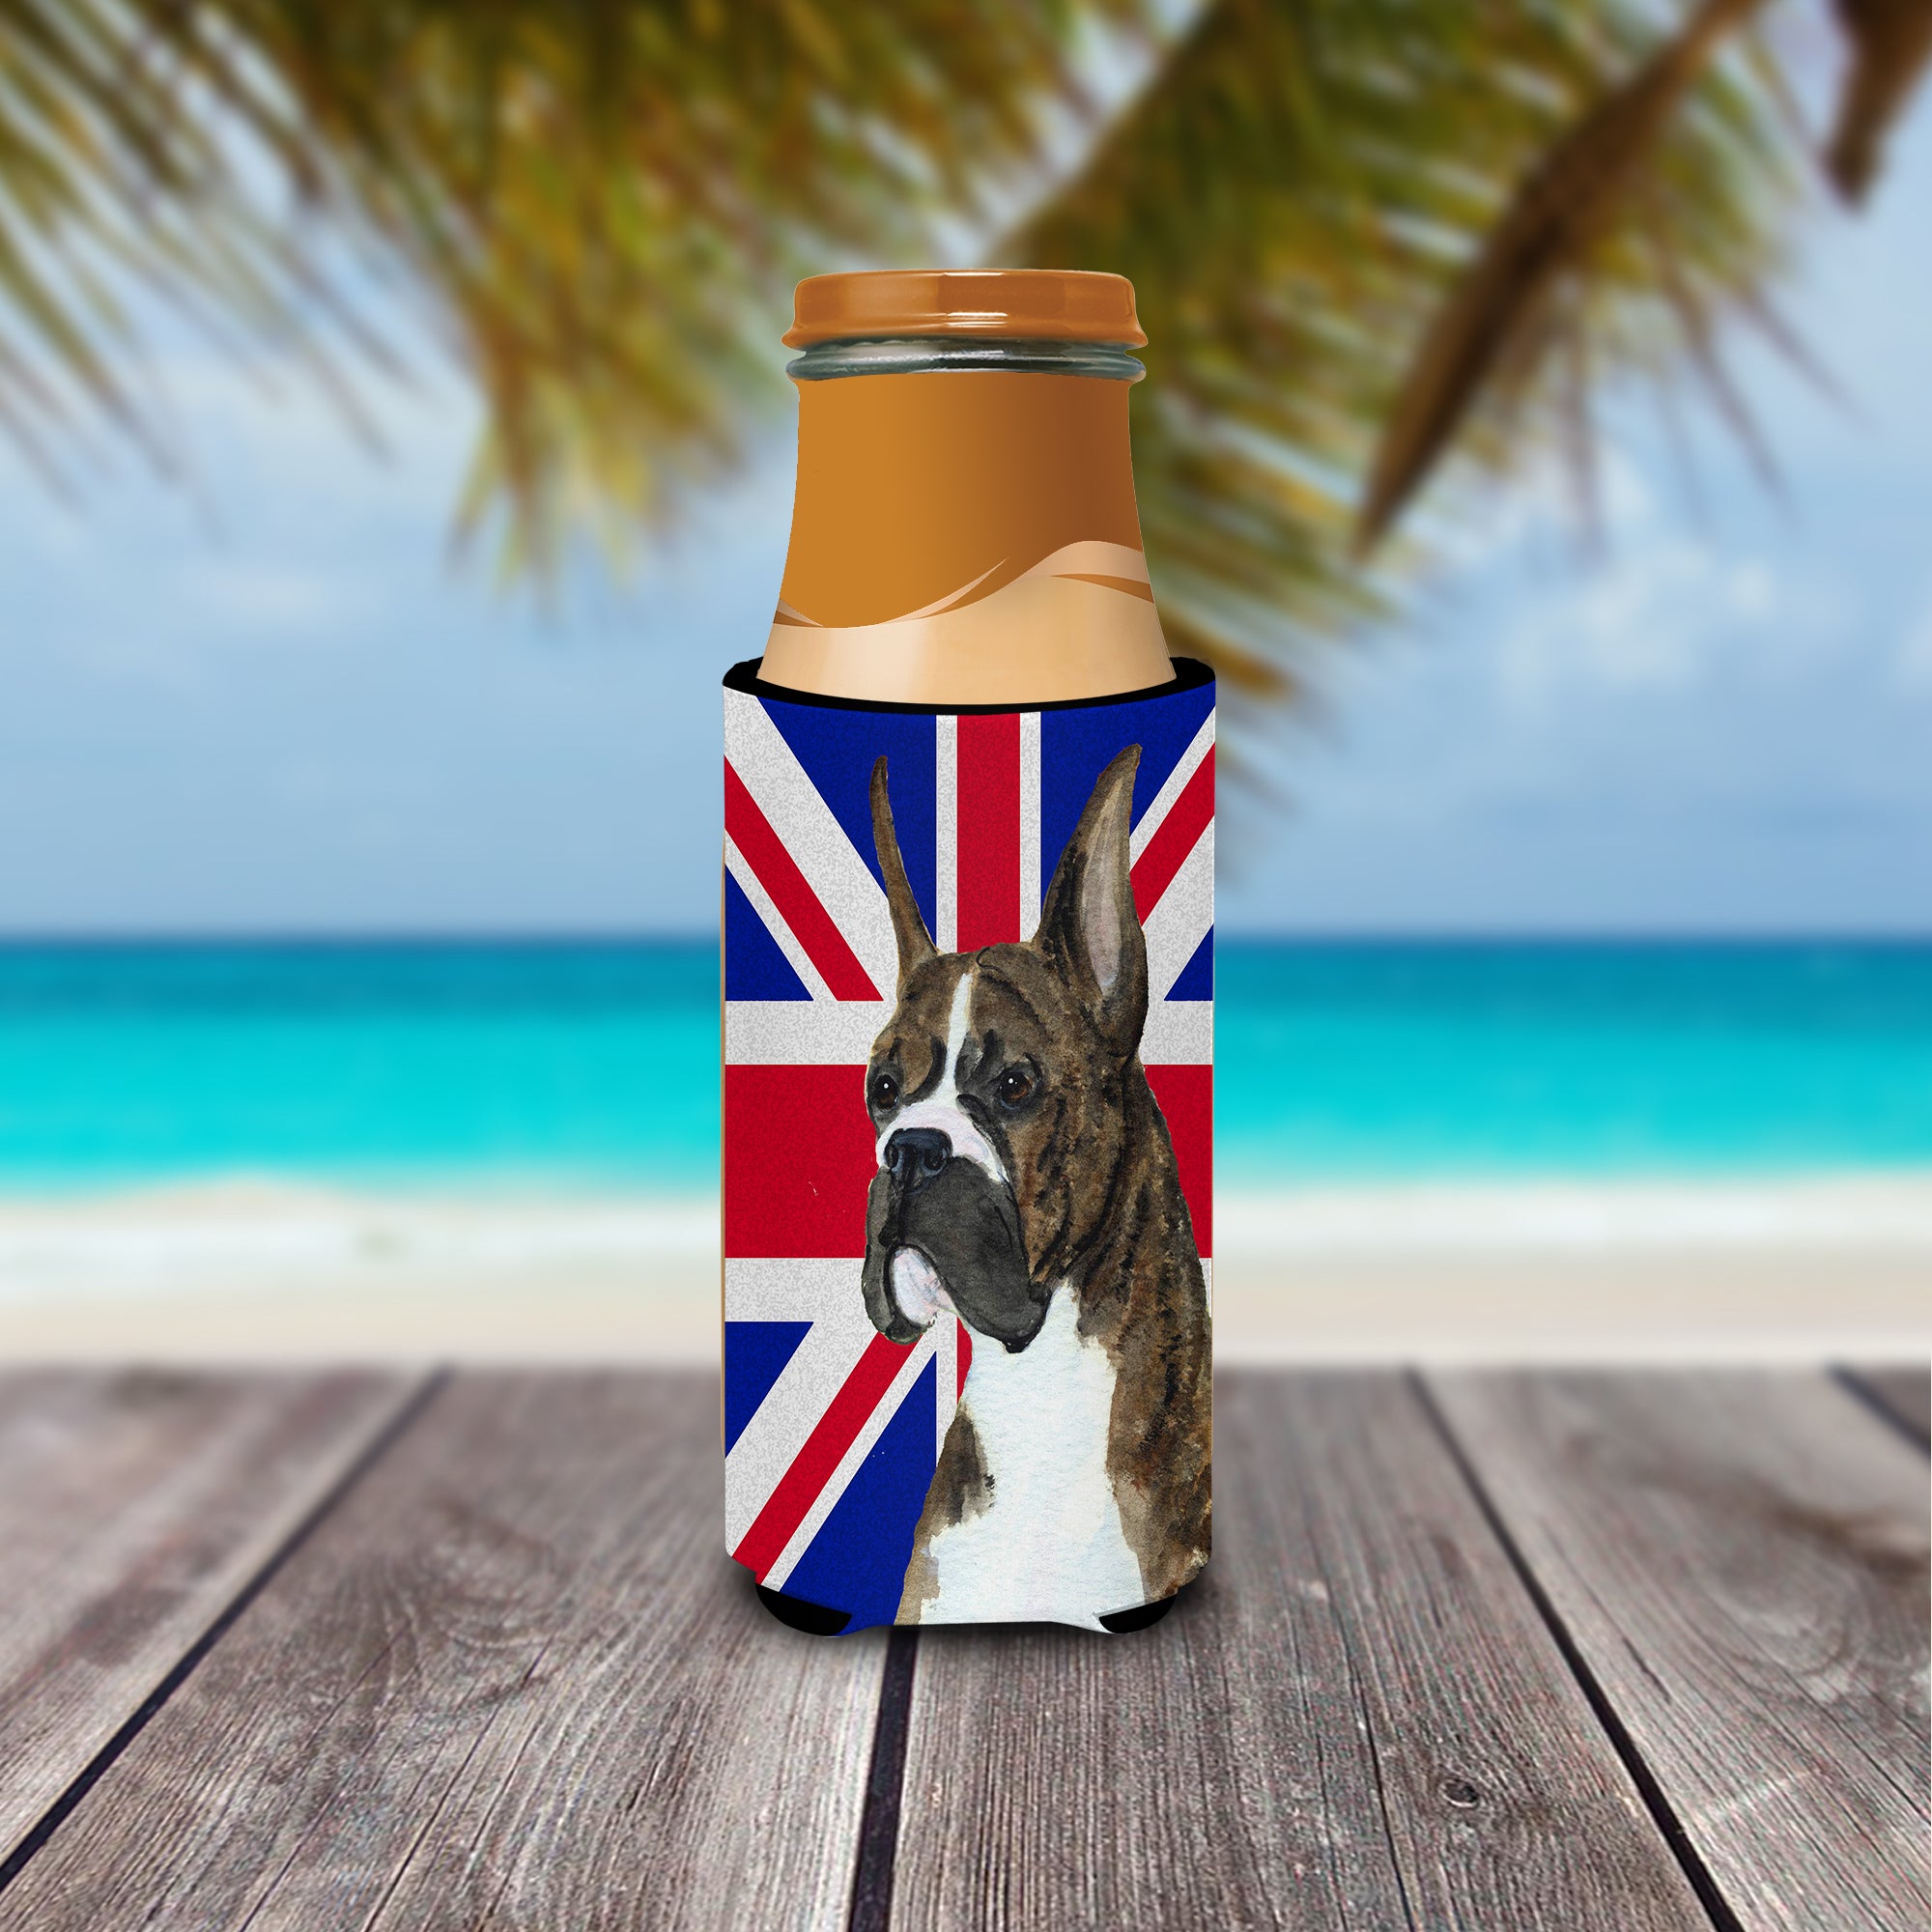 Boxer with English Union Jack British Flag Ultra Beverage Insulators for slim cans SS4950MUK